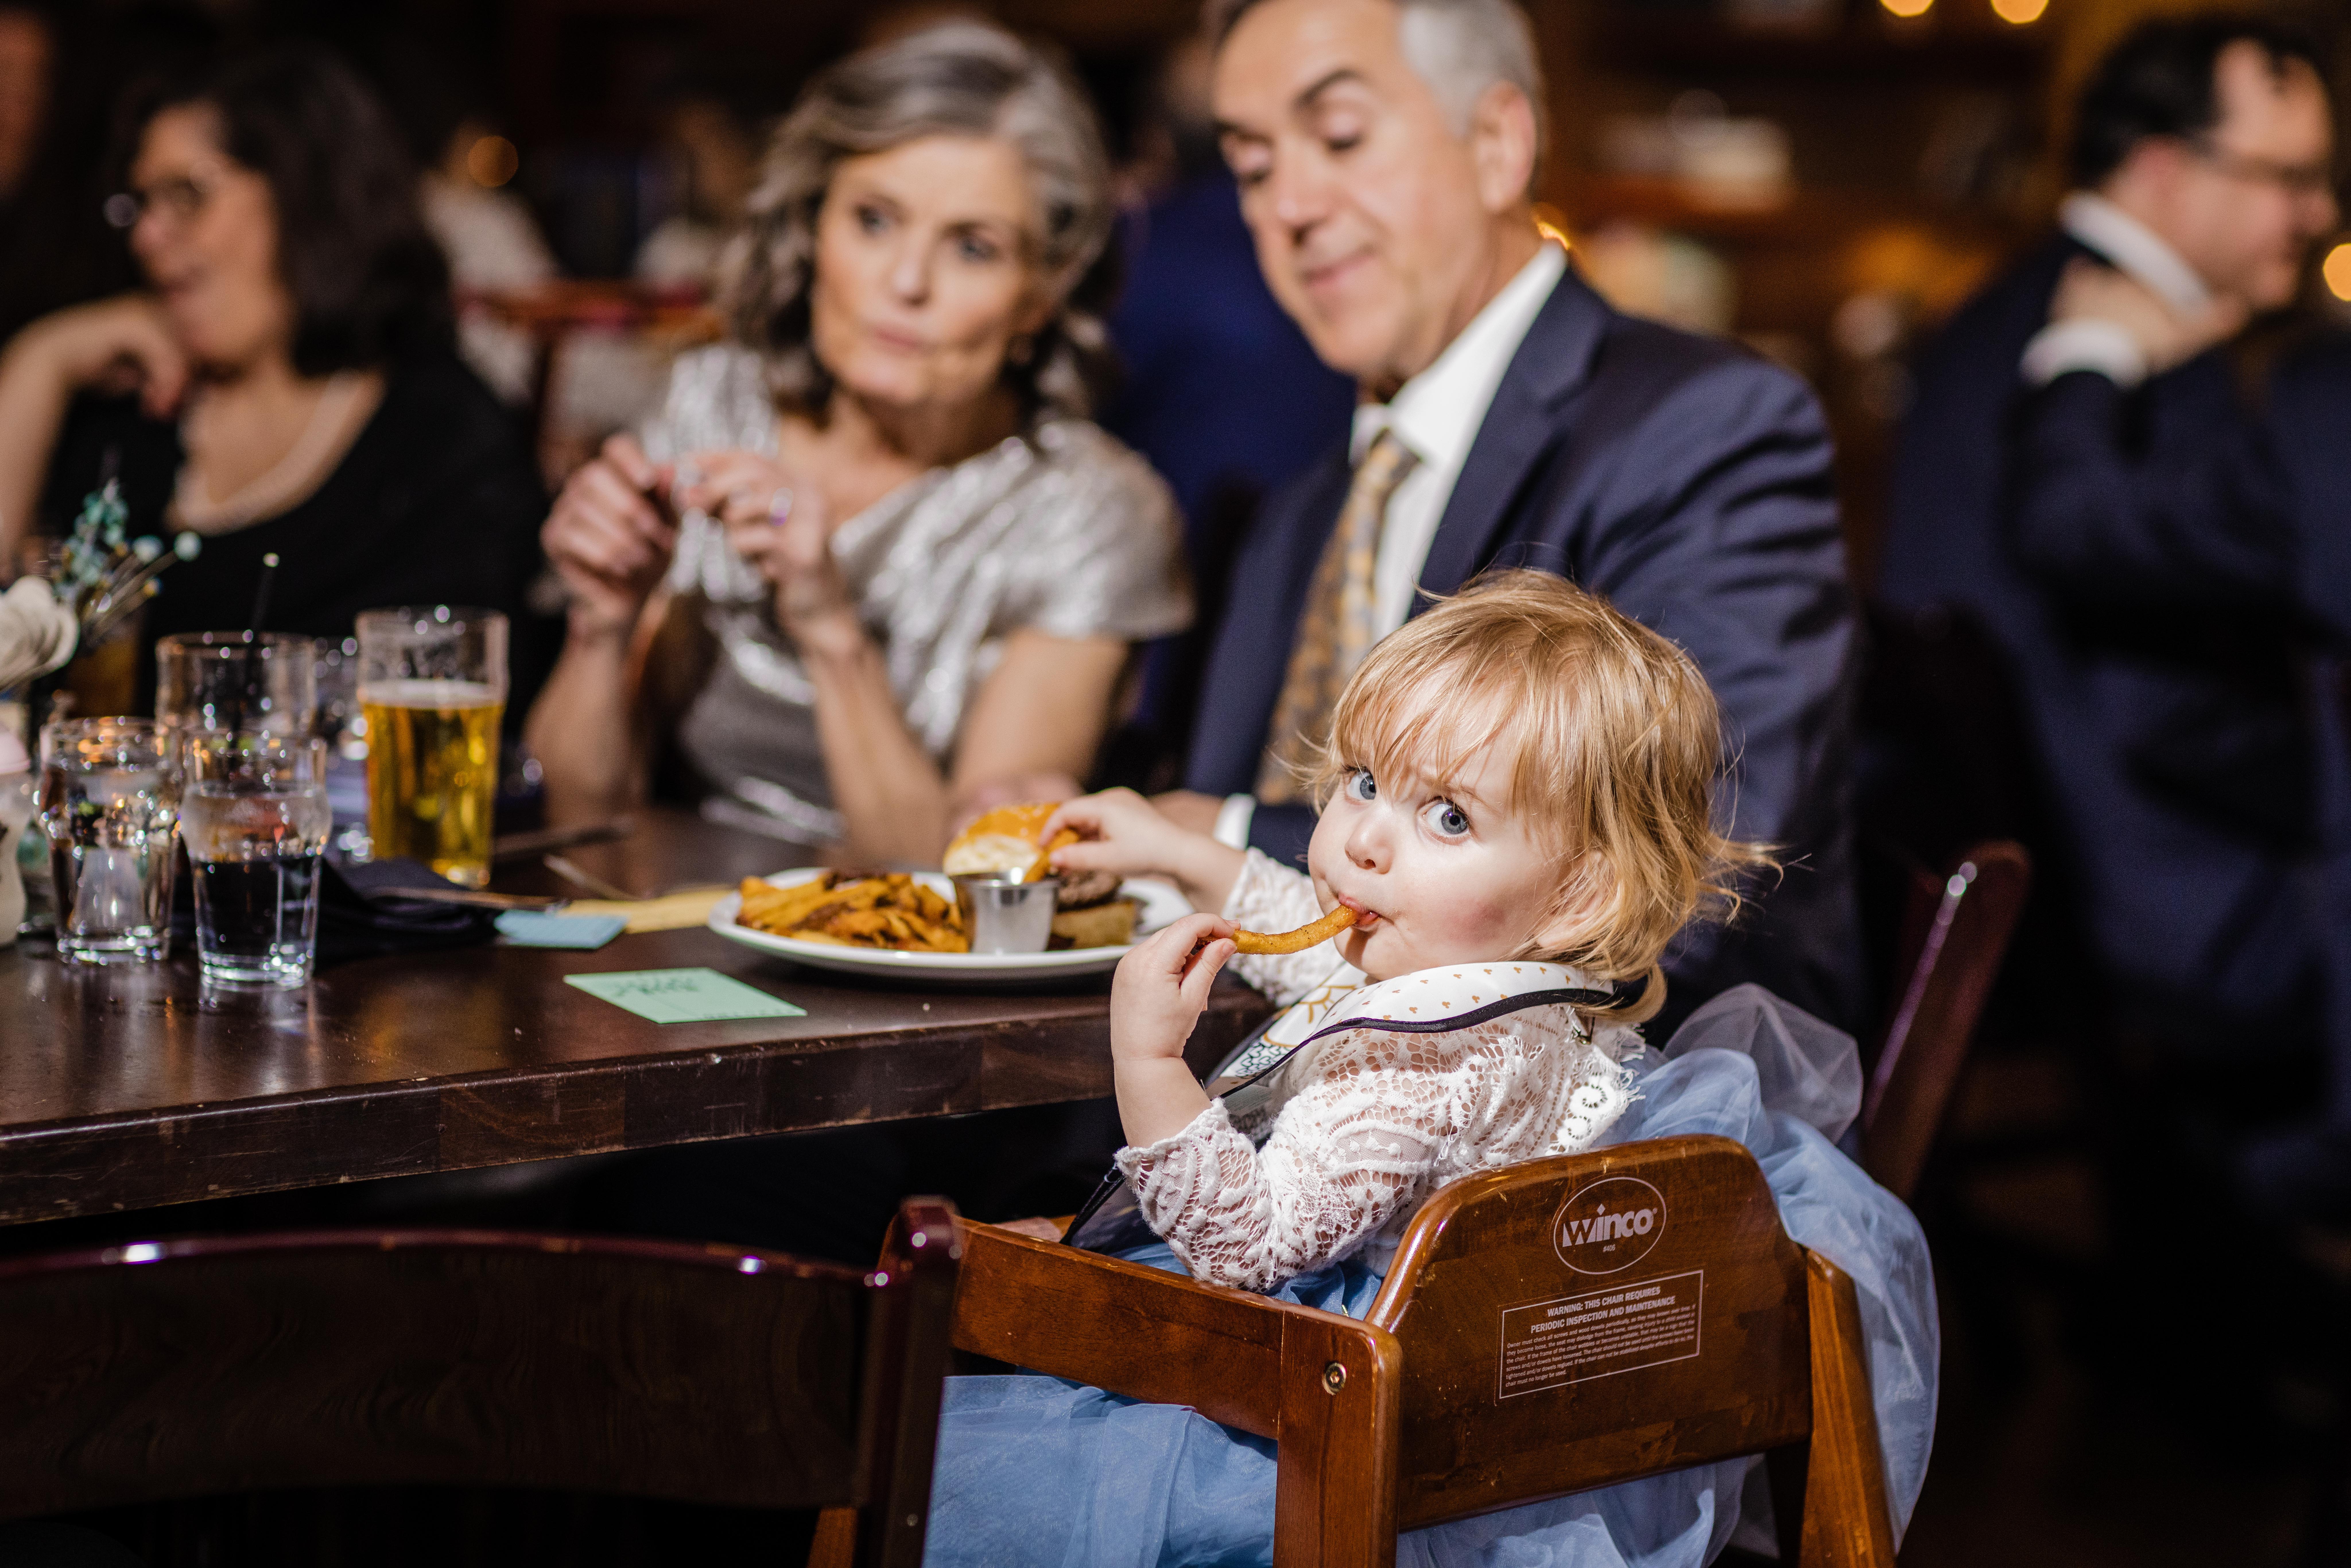 Little girl eating a french fry at a Revolution Brewing Wedding